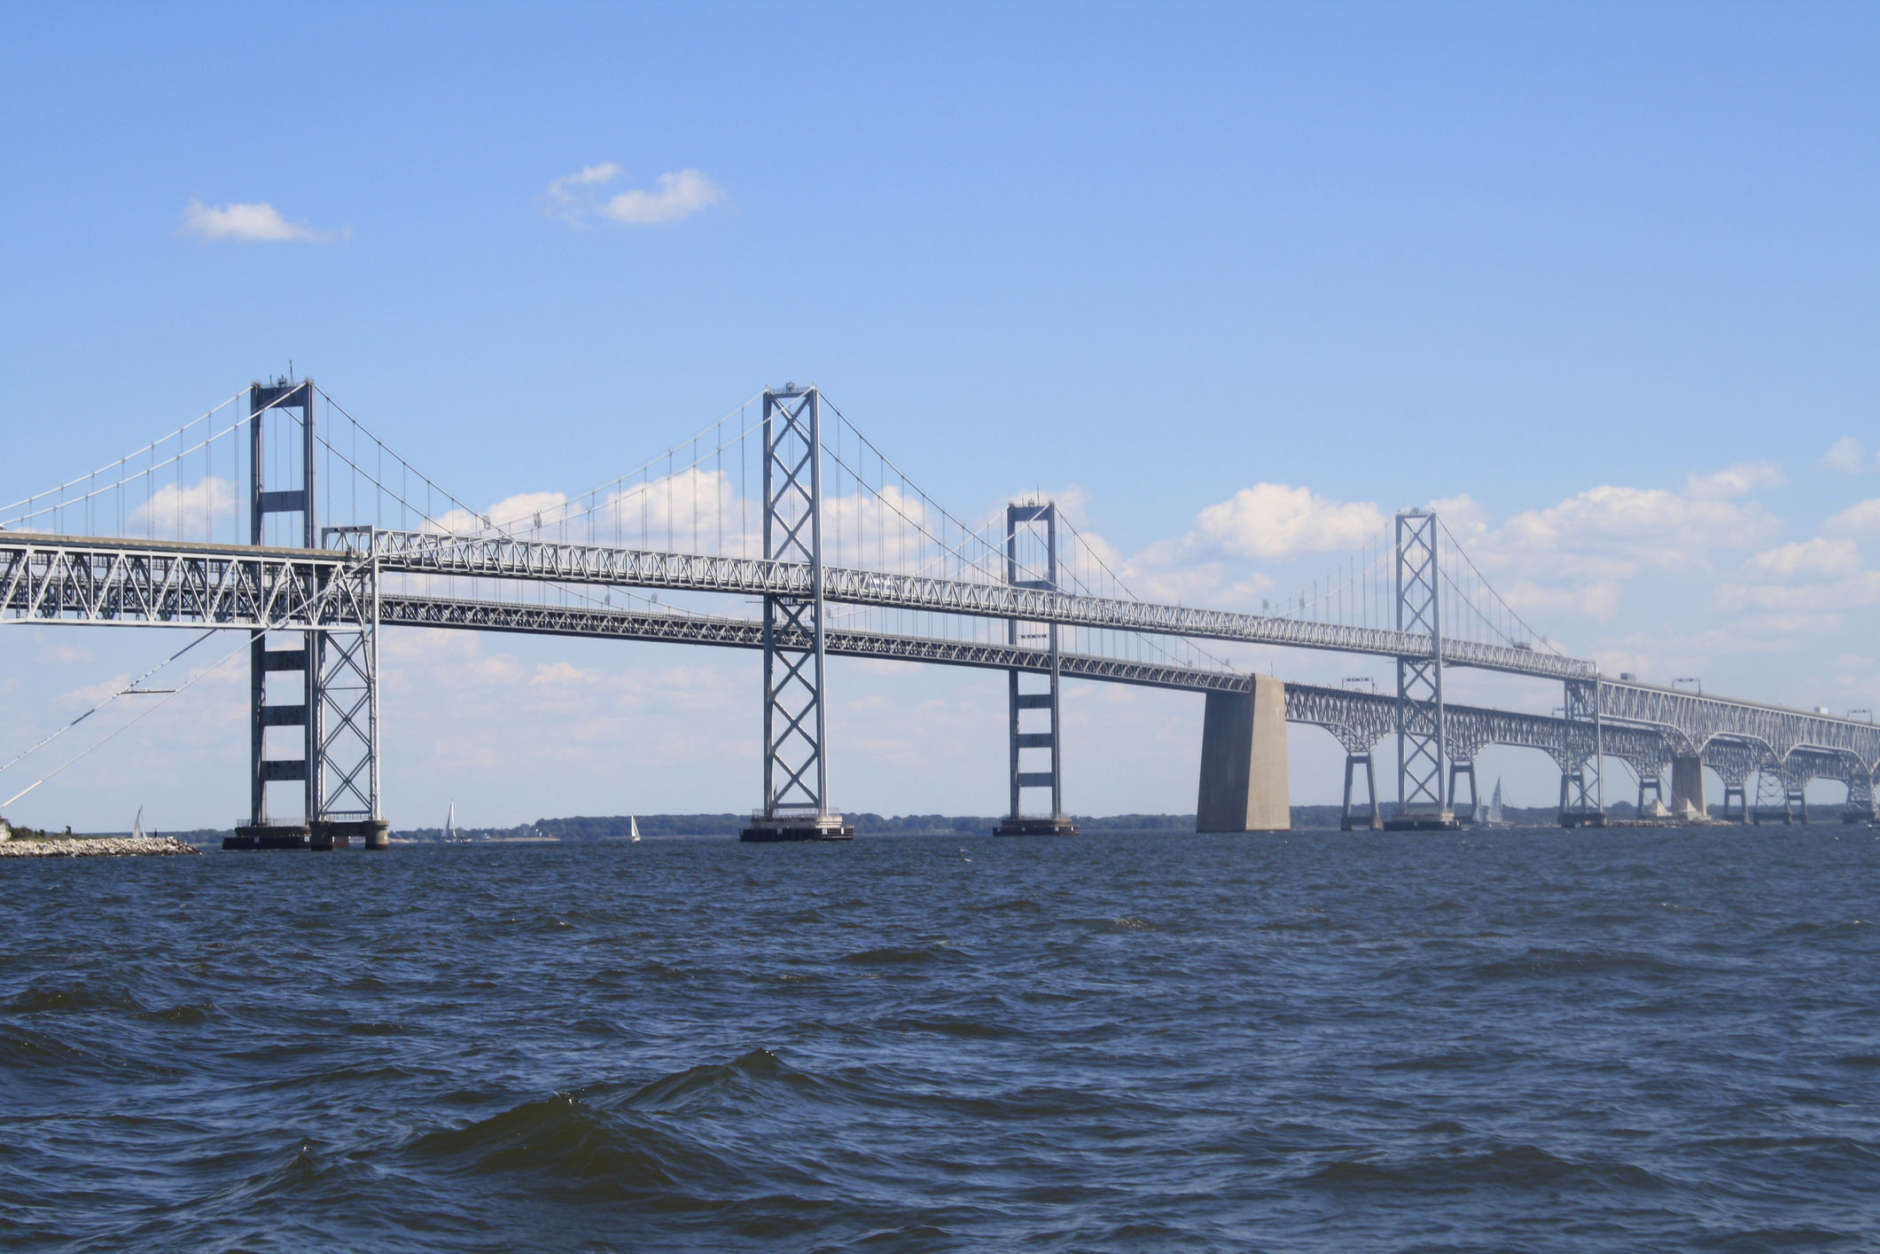 View of the Chesapeake Bay Bridge, photo taken from a boat on the Chesapeake Bay near Annapolis, Maryland (Thinkstock)